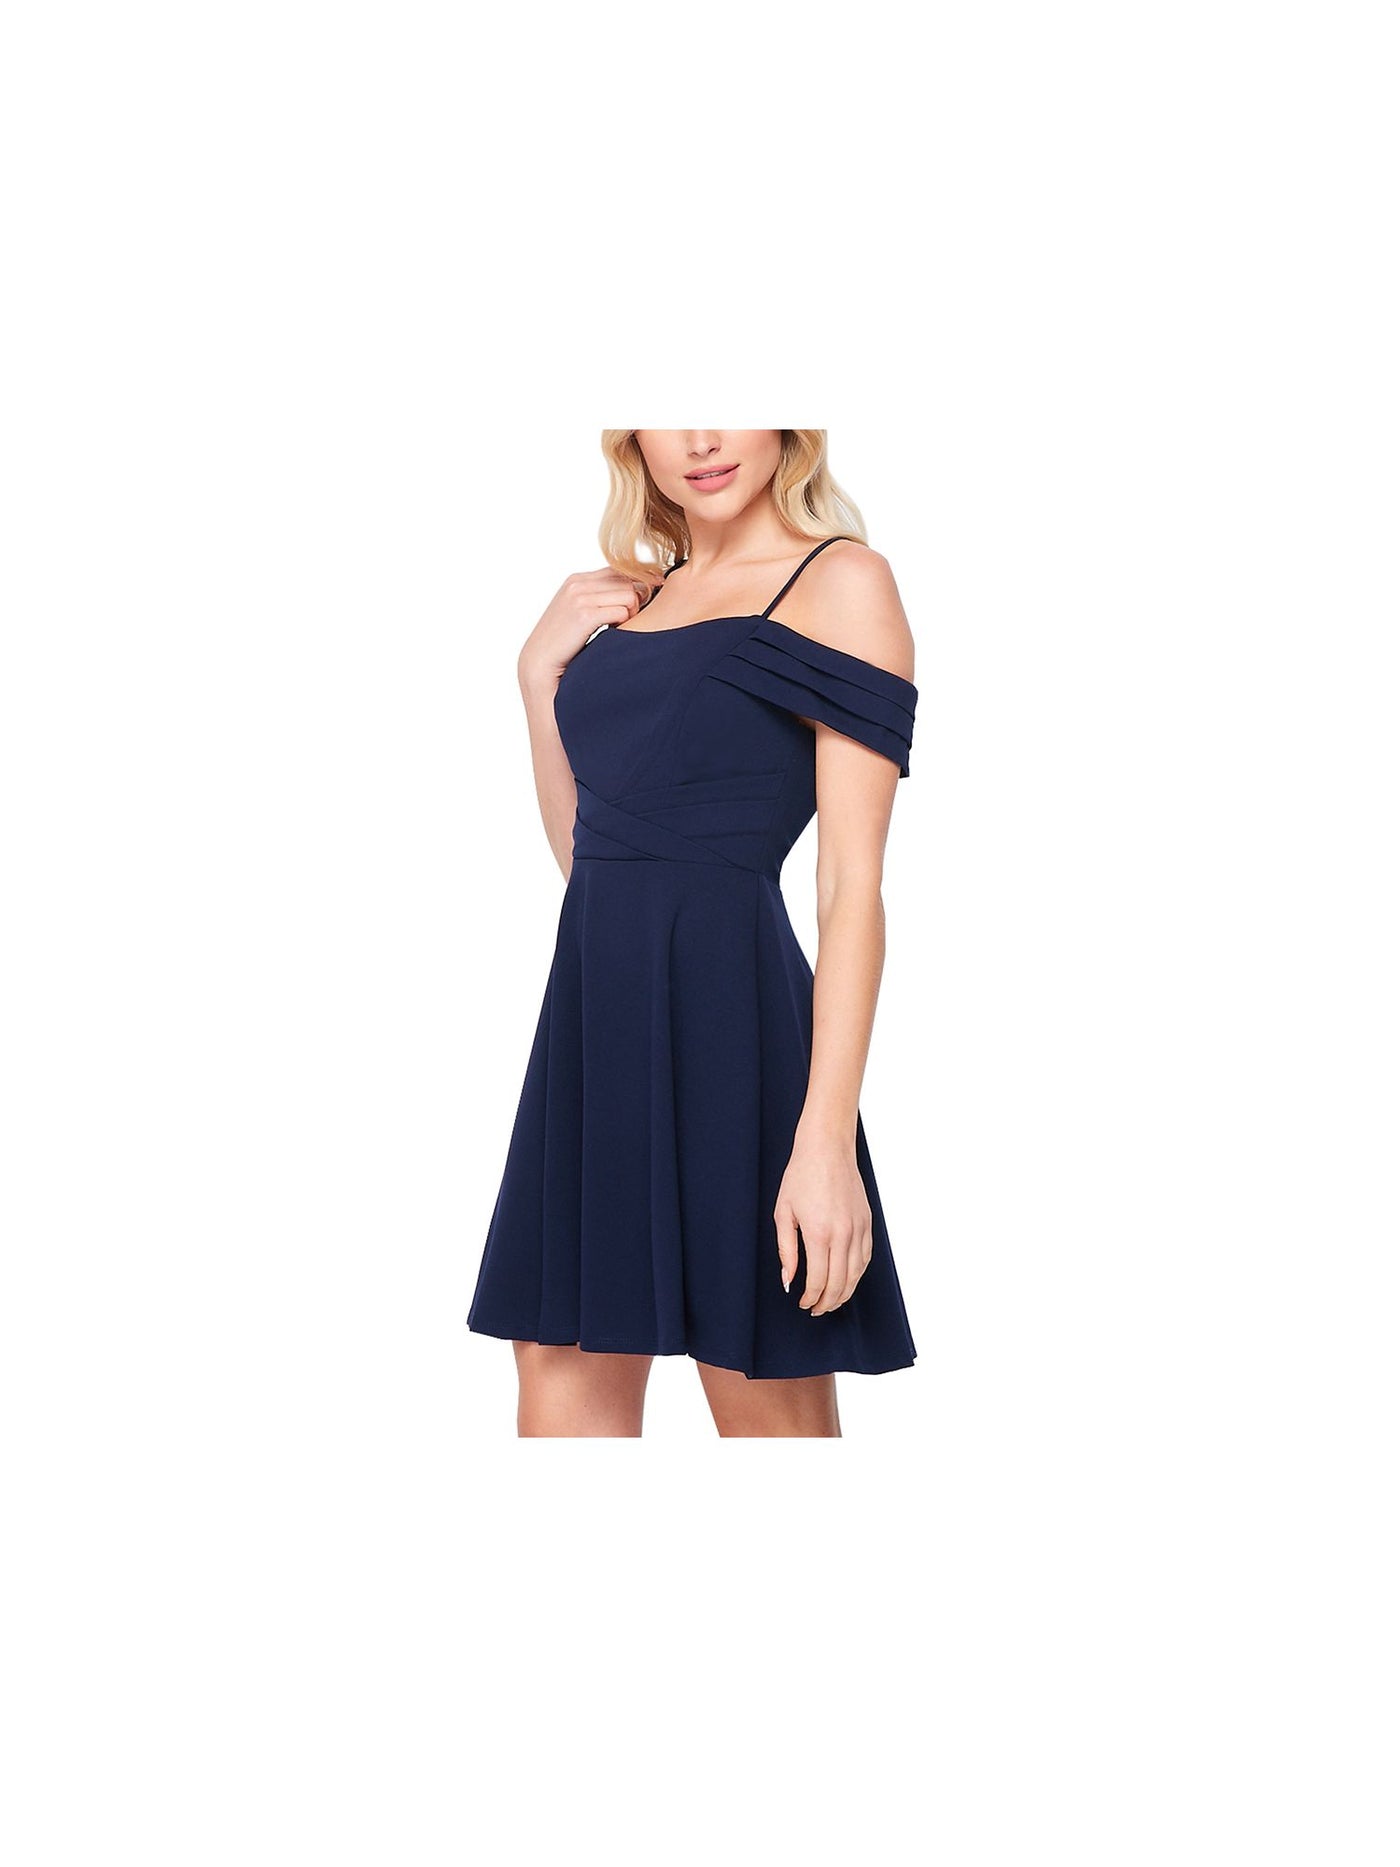 TEEZE ME Womens Navy Stretch Cold Shoulder Square Neck Mini Cocktail Fit + Flare Dress Juniors 5\6